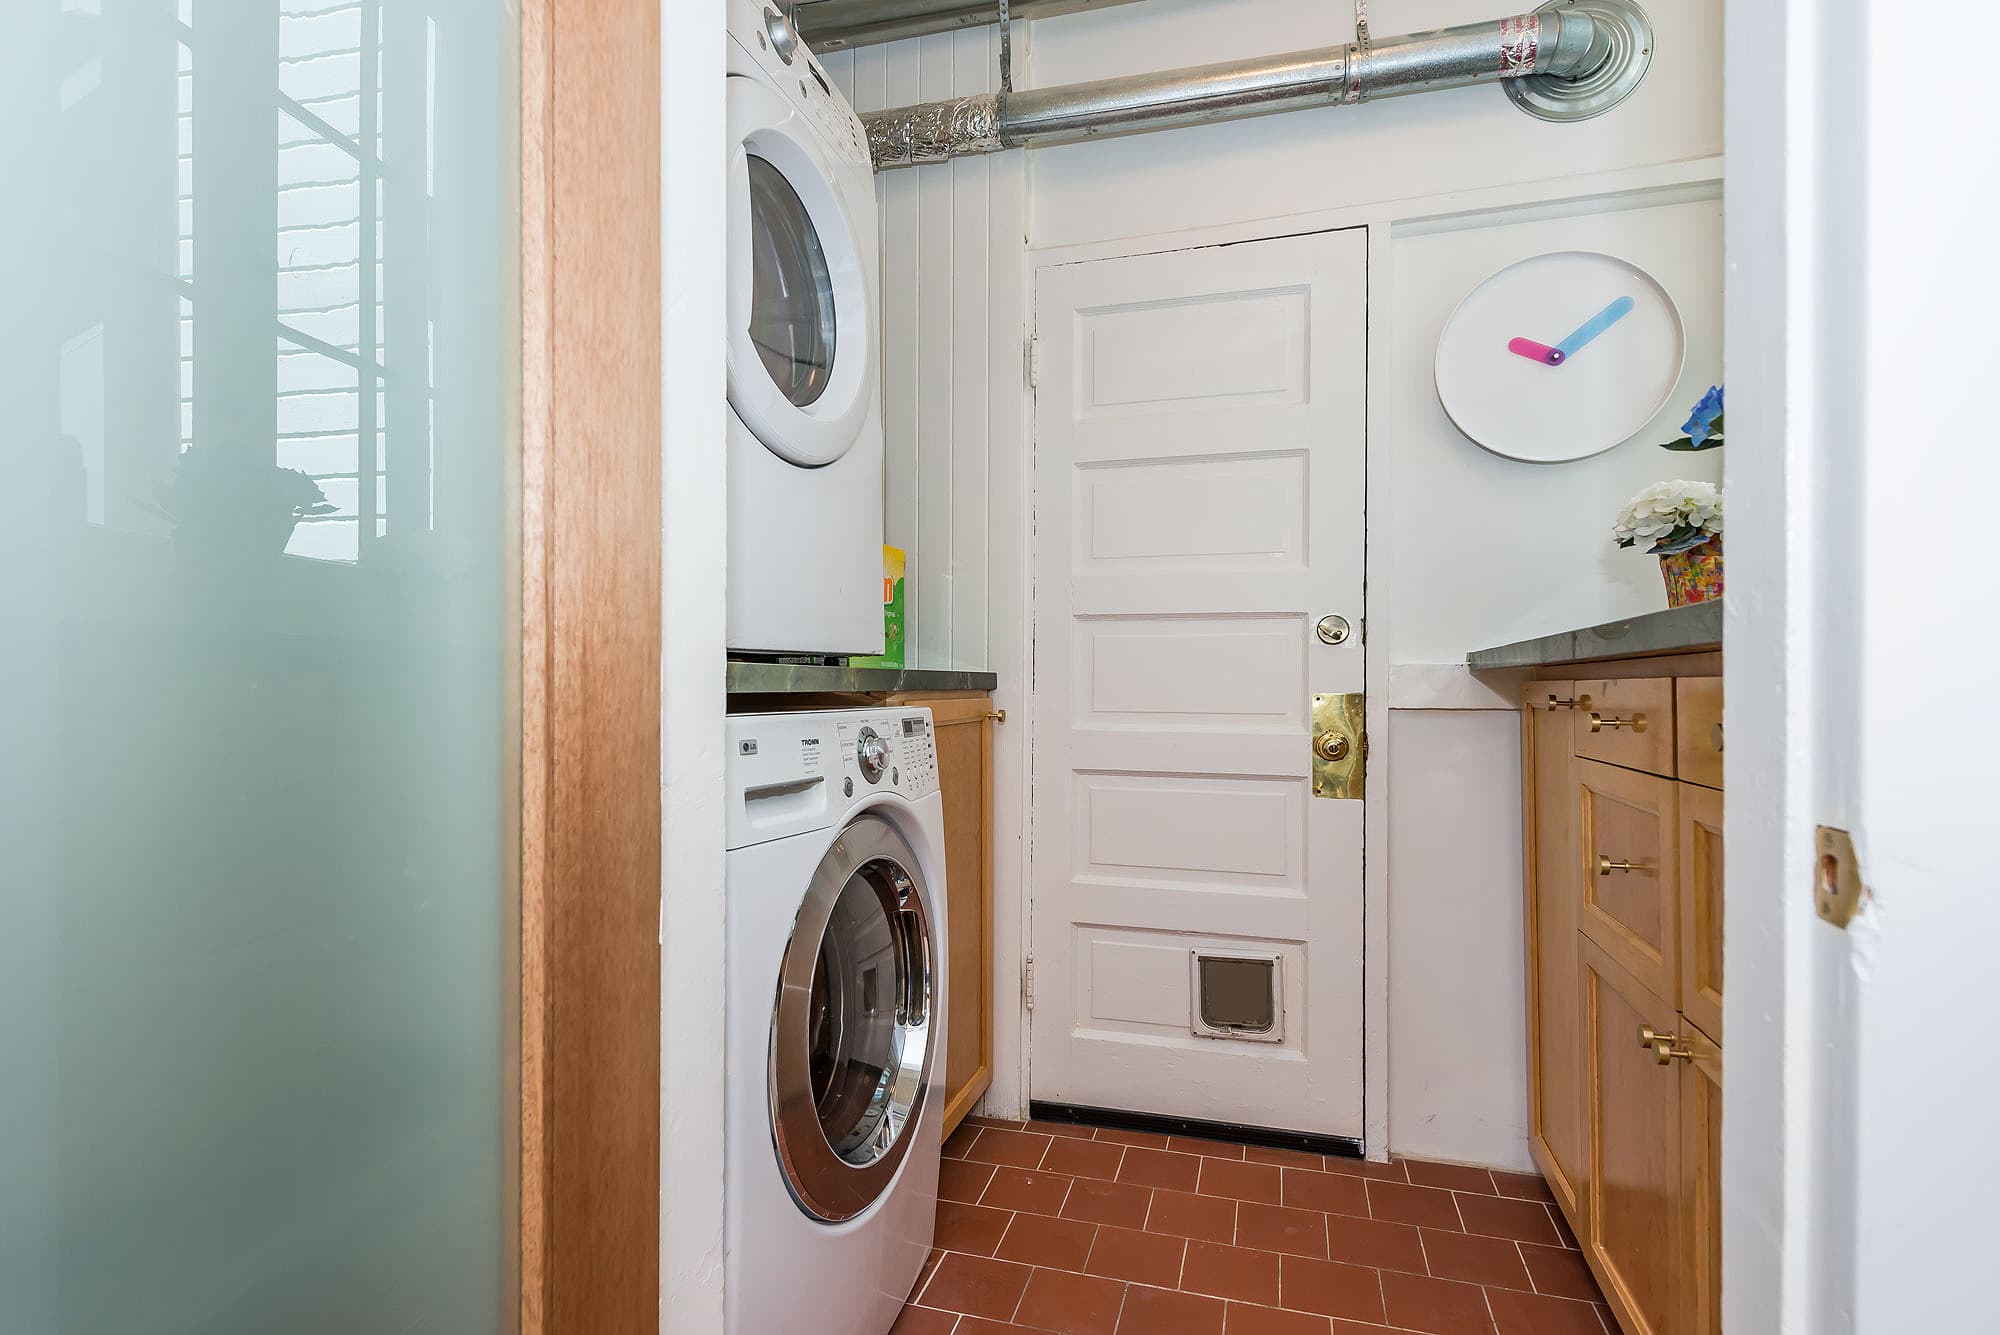 Why share laundry machines with anyone else? 714 Page has its own laundry room (complete with cat door)